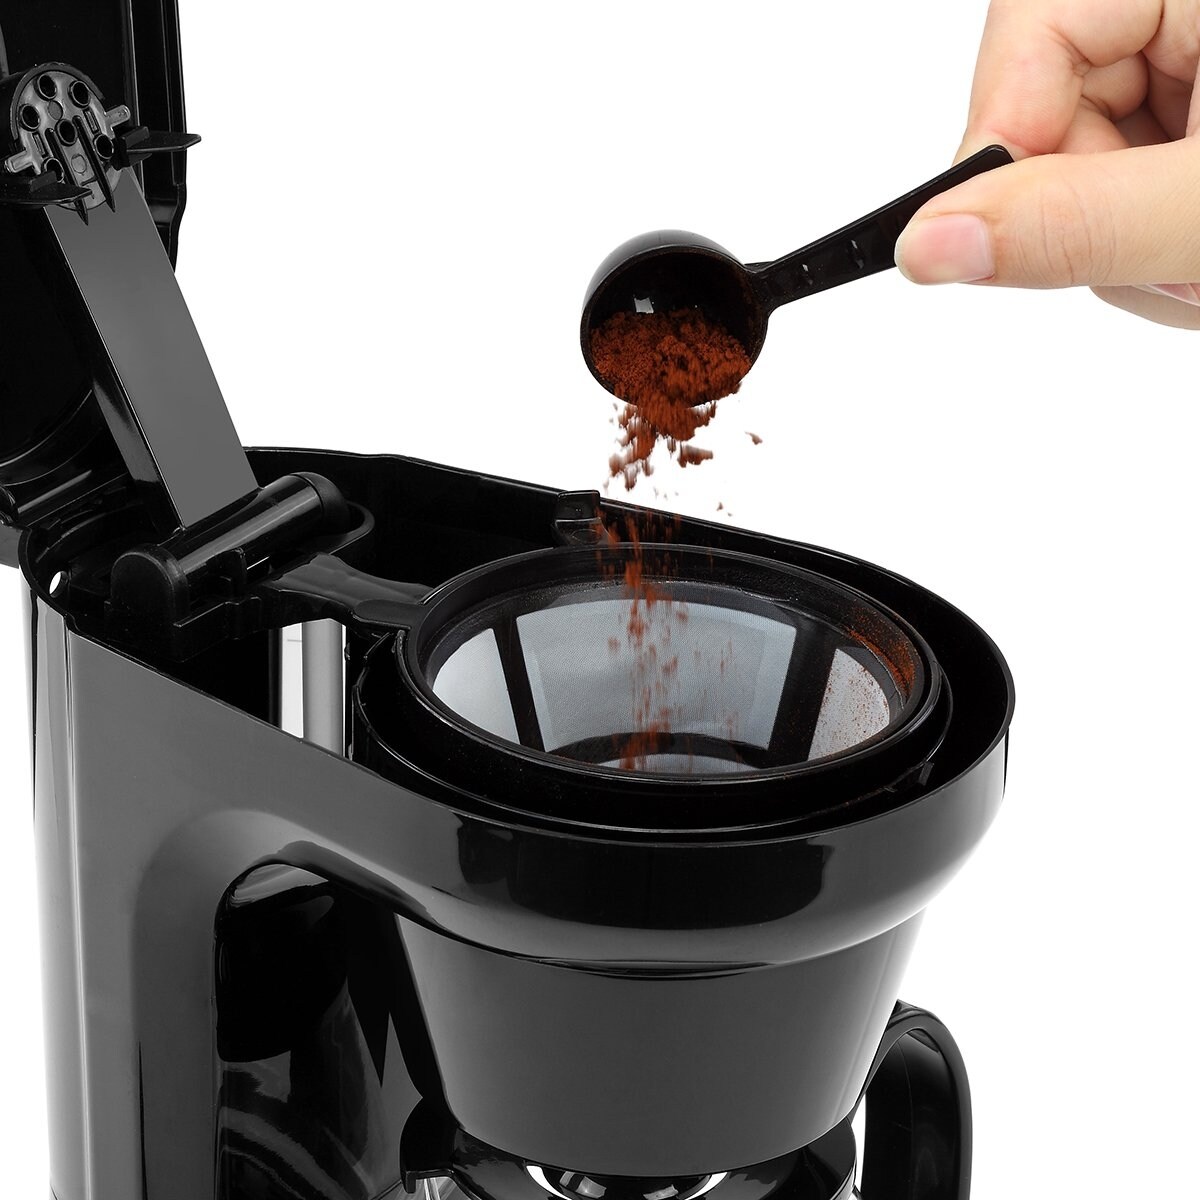 https://ak1.ostkcdn.com/images/products/is/images/direct/ad028b04f88c96759181a1f3d13c13771bd43ab6/5CUP-Coffee-Maker---Space-Saving-Design%2C-Auto-Pause-and-Serve%2C-Removable-Filter-Basket%2C-BLACK.jpg